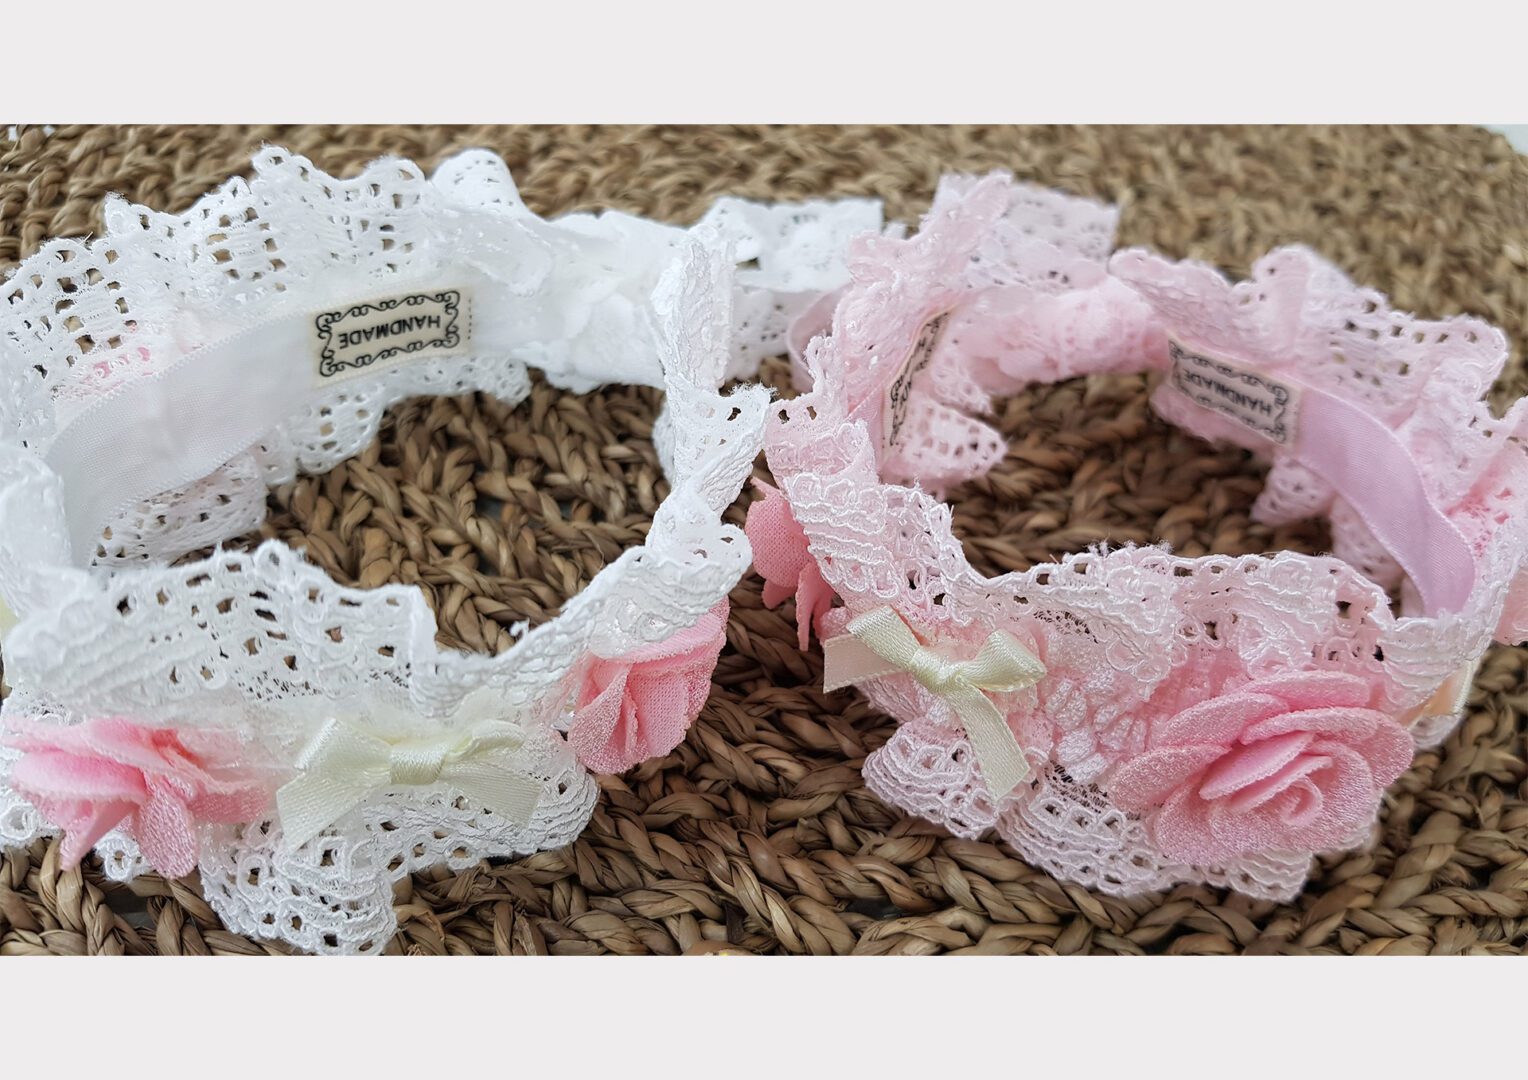 Two bracelets with lace and flowers on them.